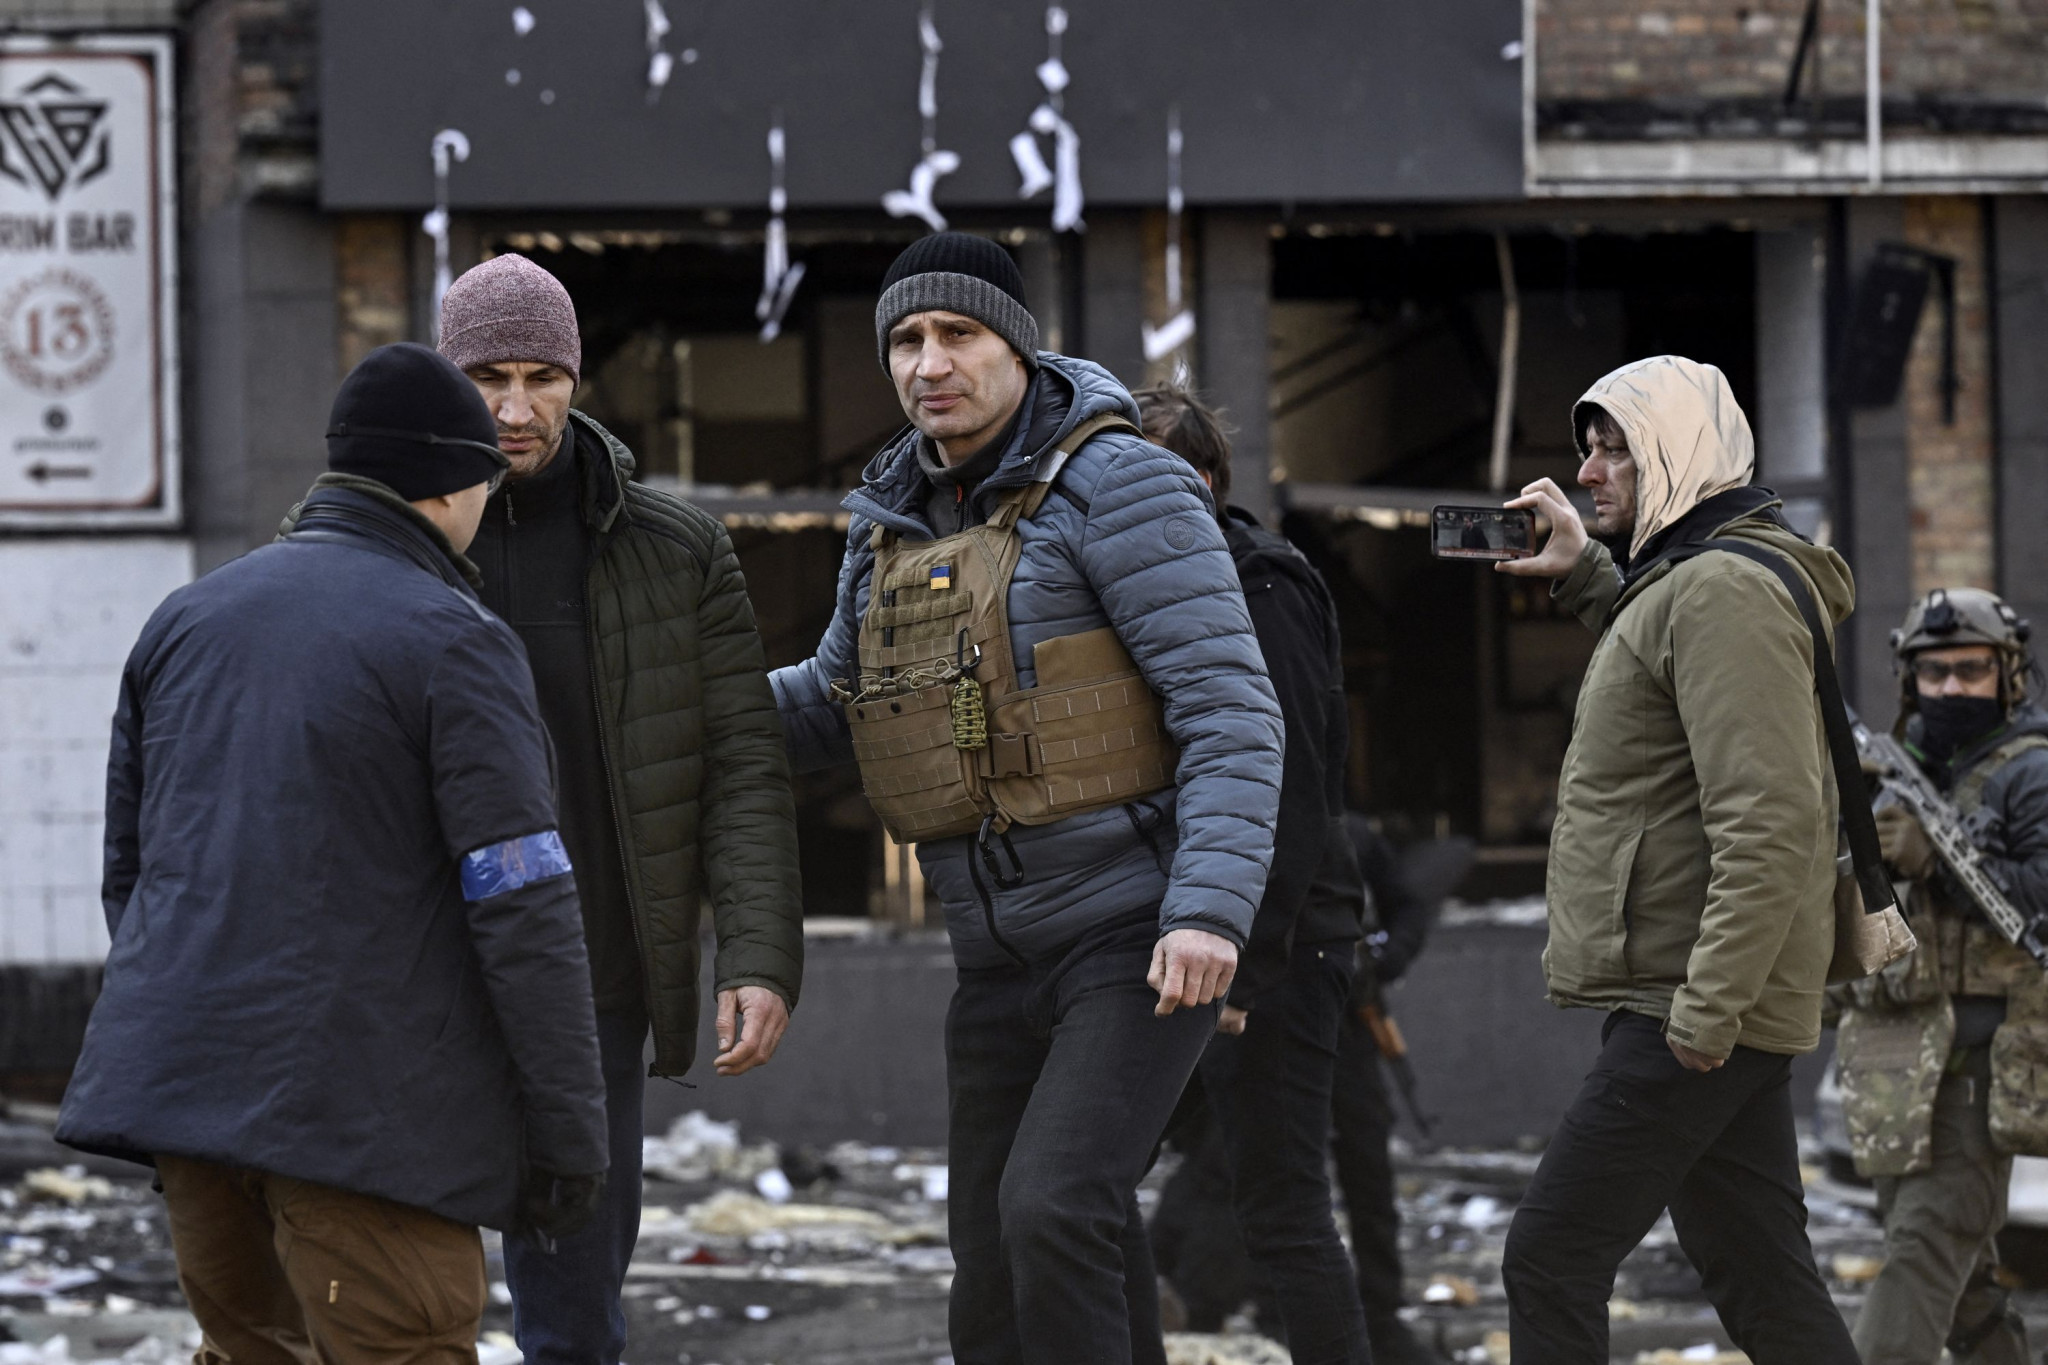 Kyiv's mayor Vitali Klitschko, centre, walks next to his brother Wladimir, second from left, in front of a destroyed apartment building, in Kyiv following the Russian invasion of Ukraine ©Getty Images